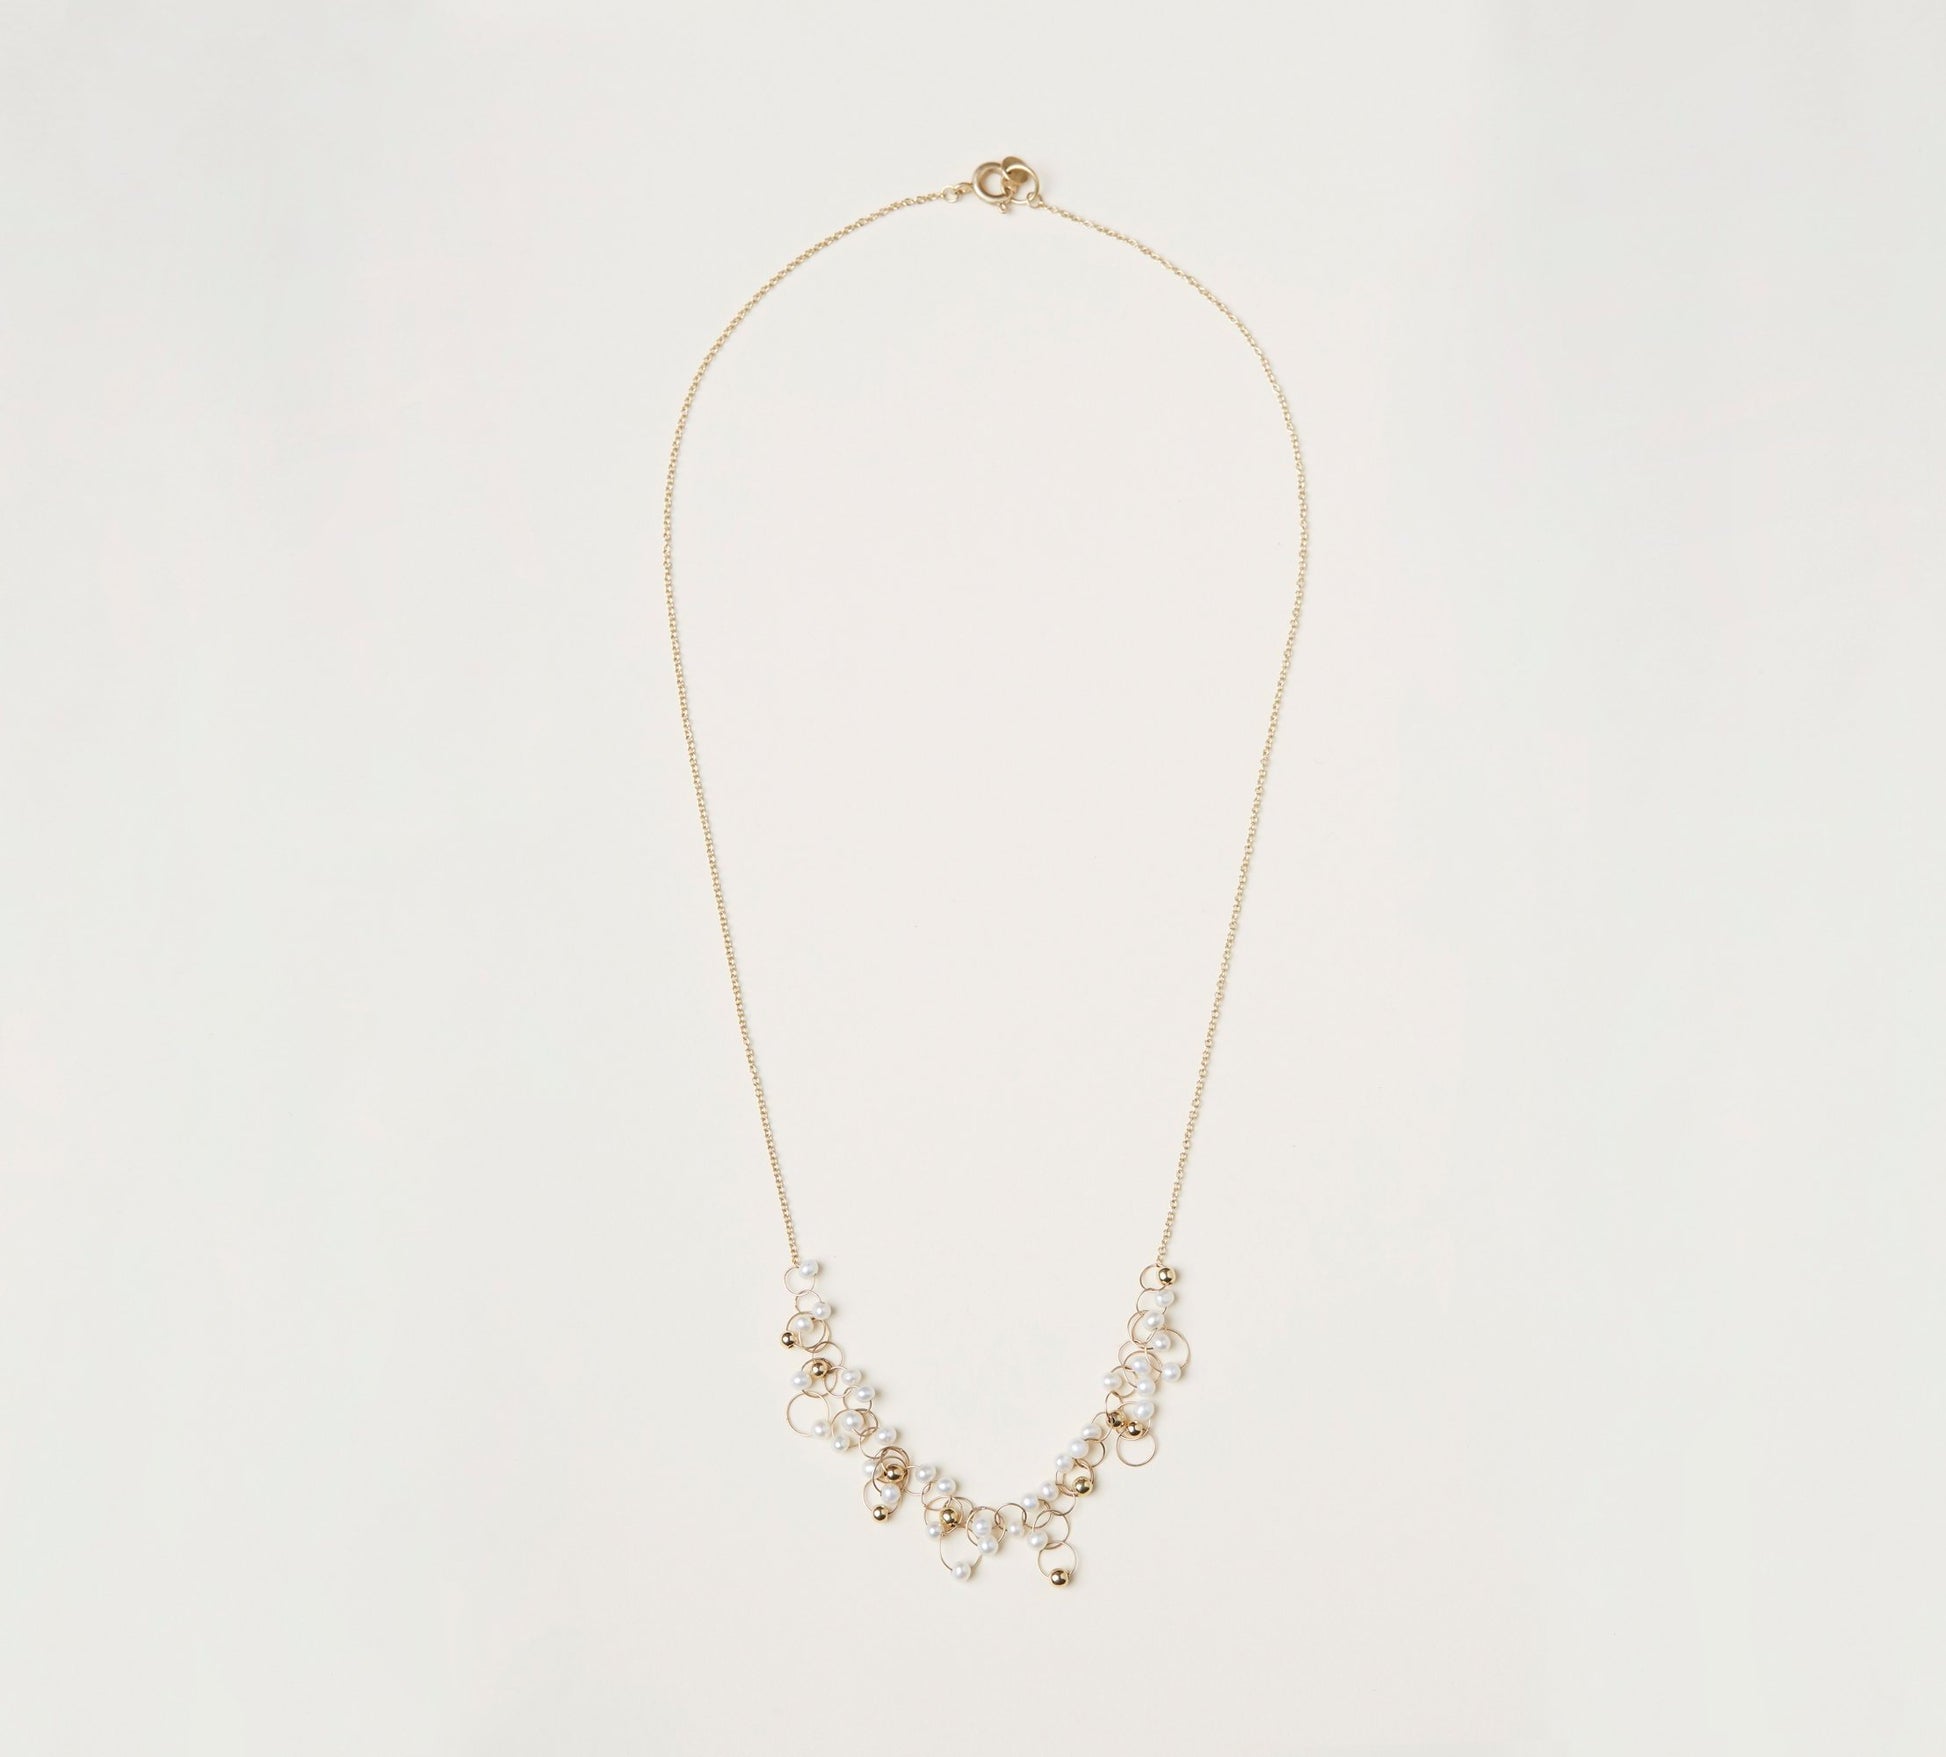 18KT yellow gold necklace with freshwater pearls - Infinito 02N